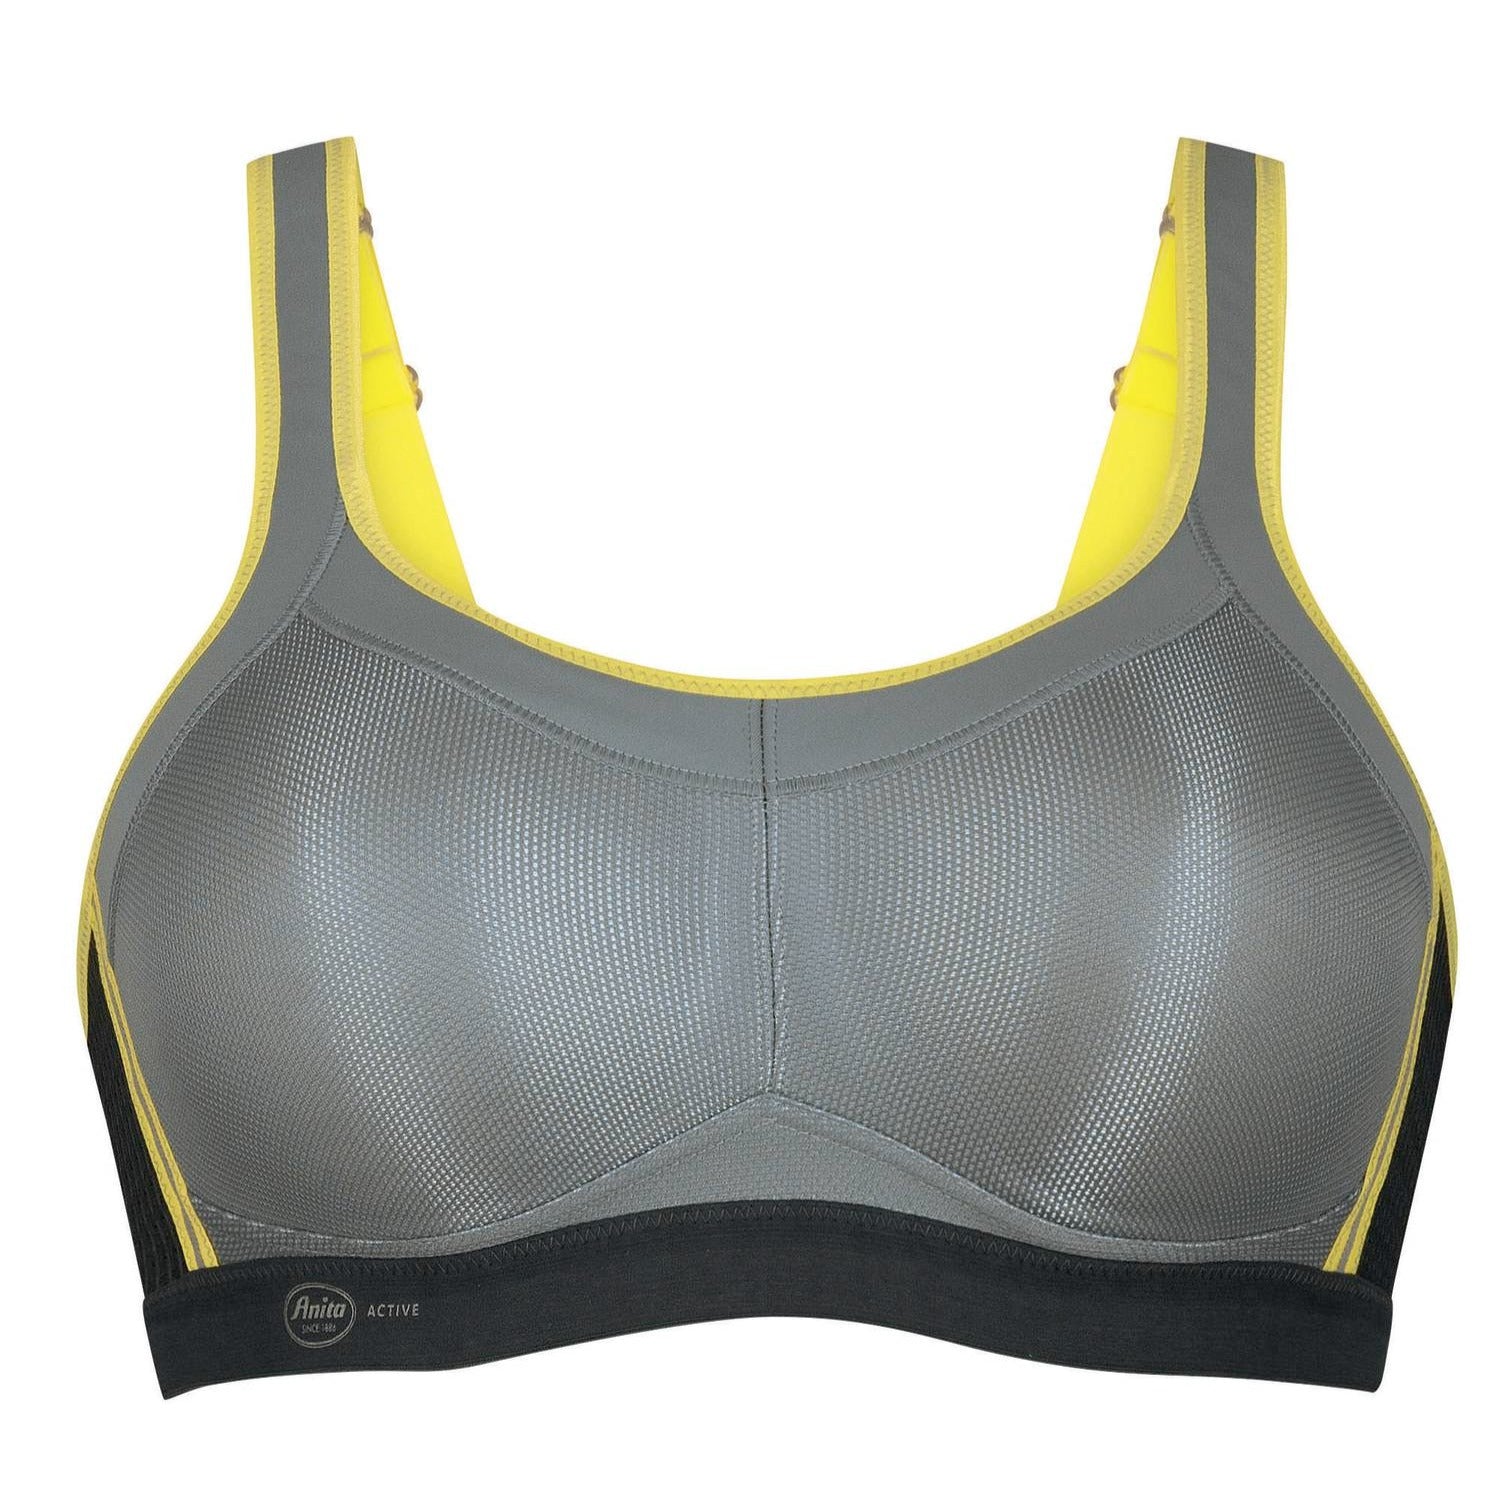 Freya Lingerie Sonic Sport-Underwired Sports bra E-H cup STORM –